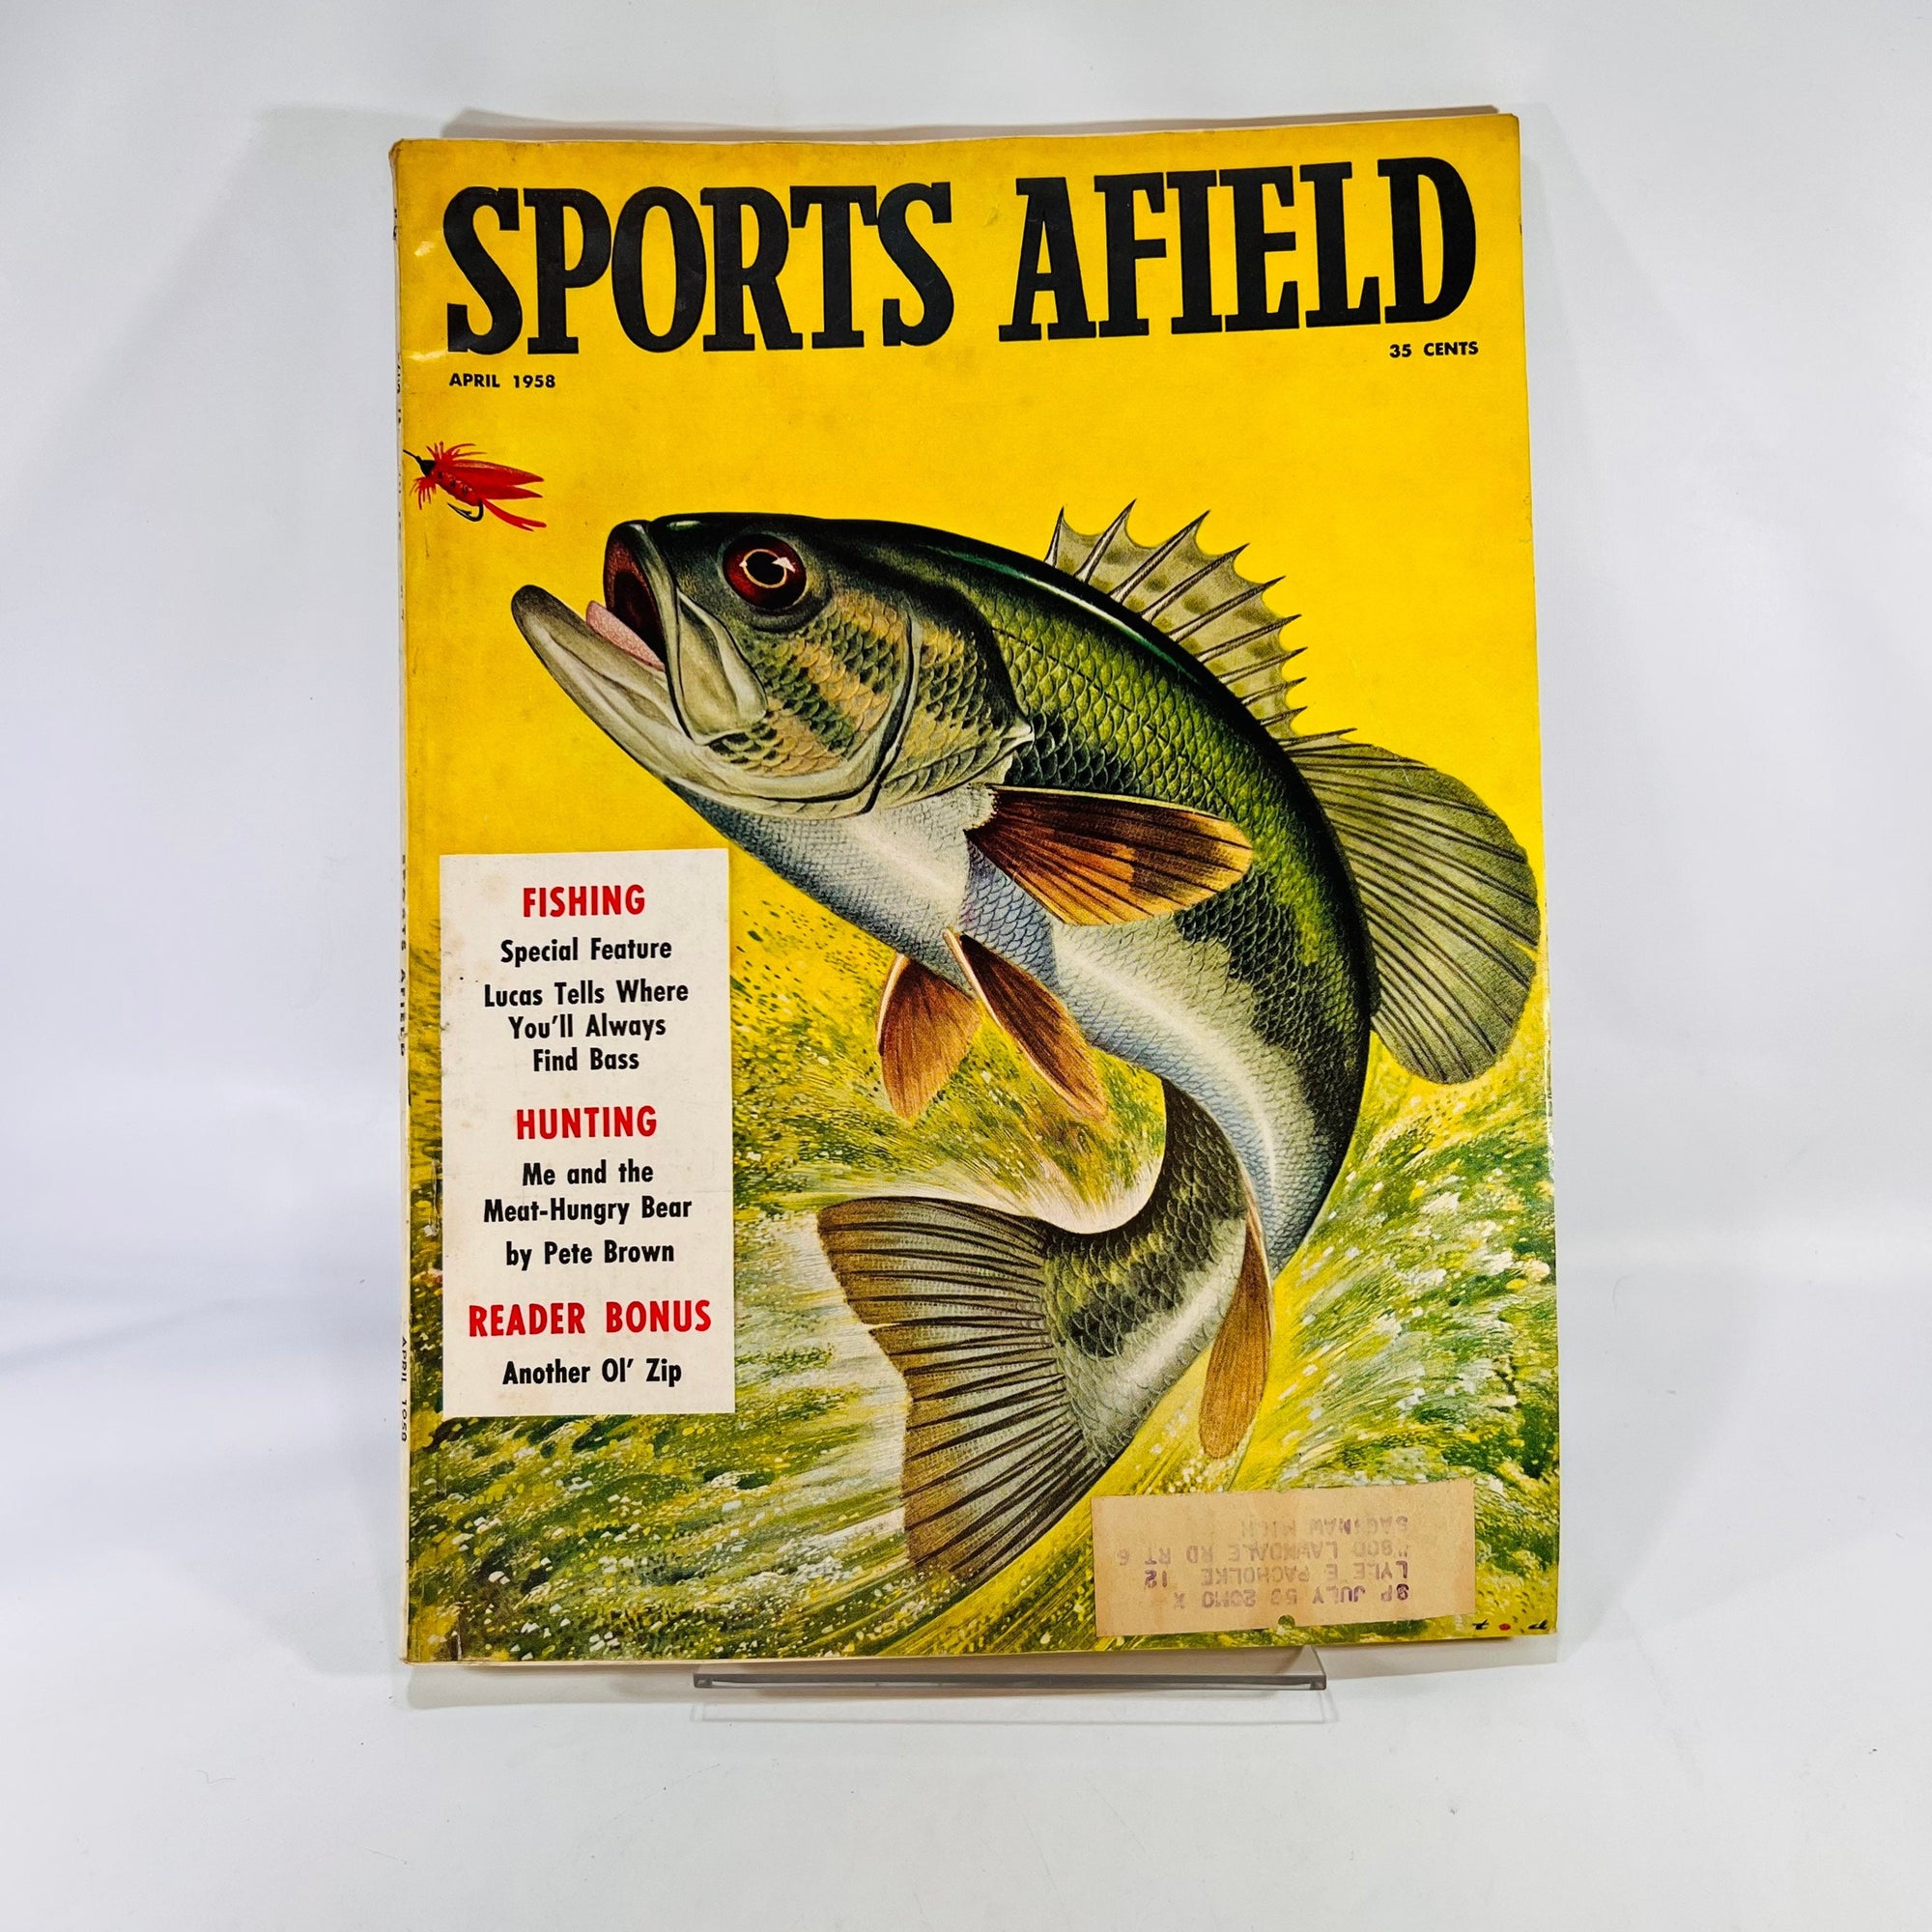 Sports Afield Vintage Magazine April 1958 Volume 139 Number 4 Hearst Corp. Hunting Fishing Advertising